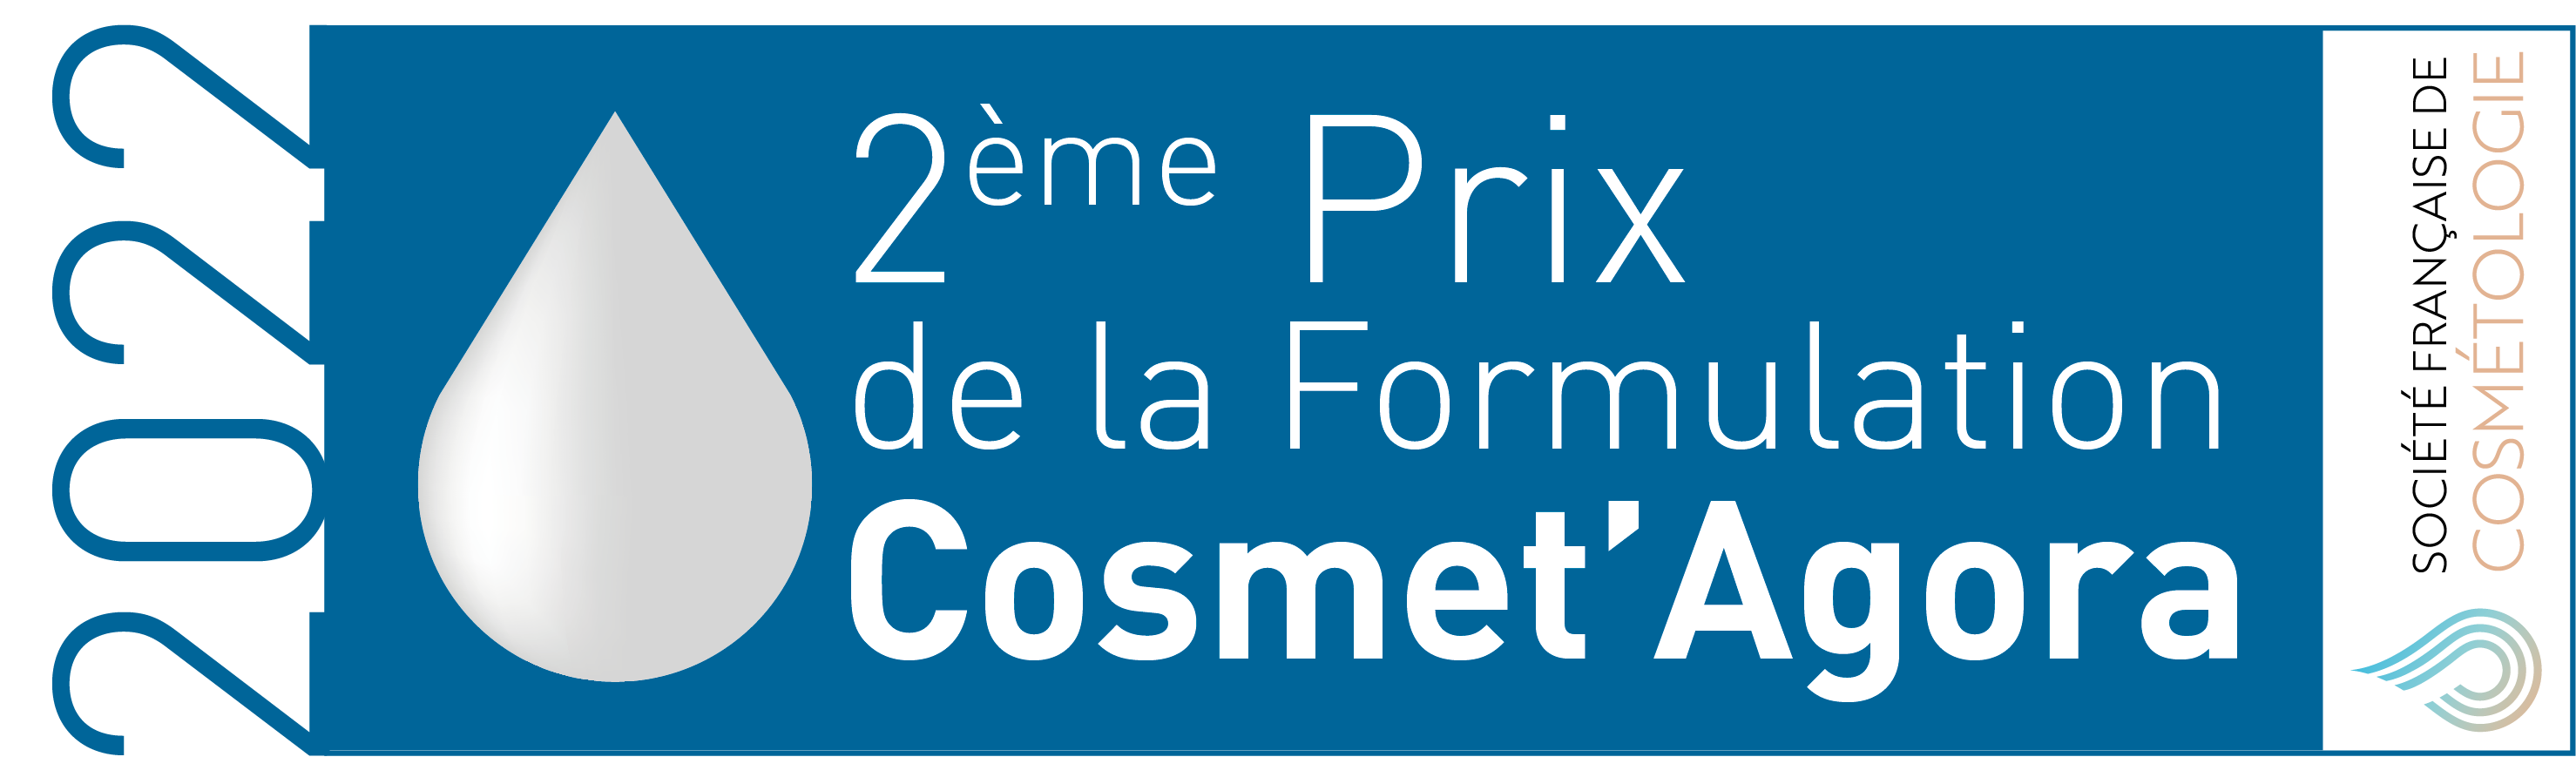 The jury of the Cosmet' Agora formulation contest awards PolymerExpert the second prize for its product "a happy event" formulated with EstoGel® Green, the new COSMOS approved 100% biosourced oil phase rheology modifier.